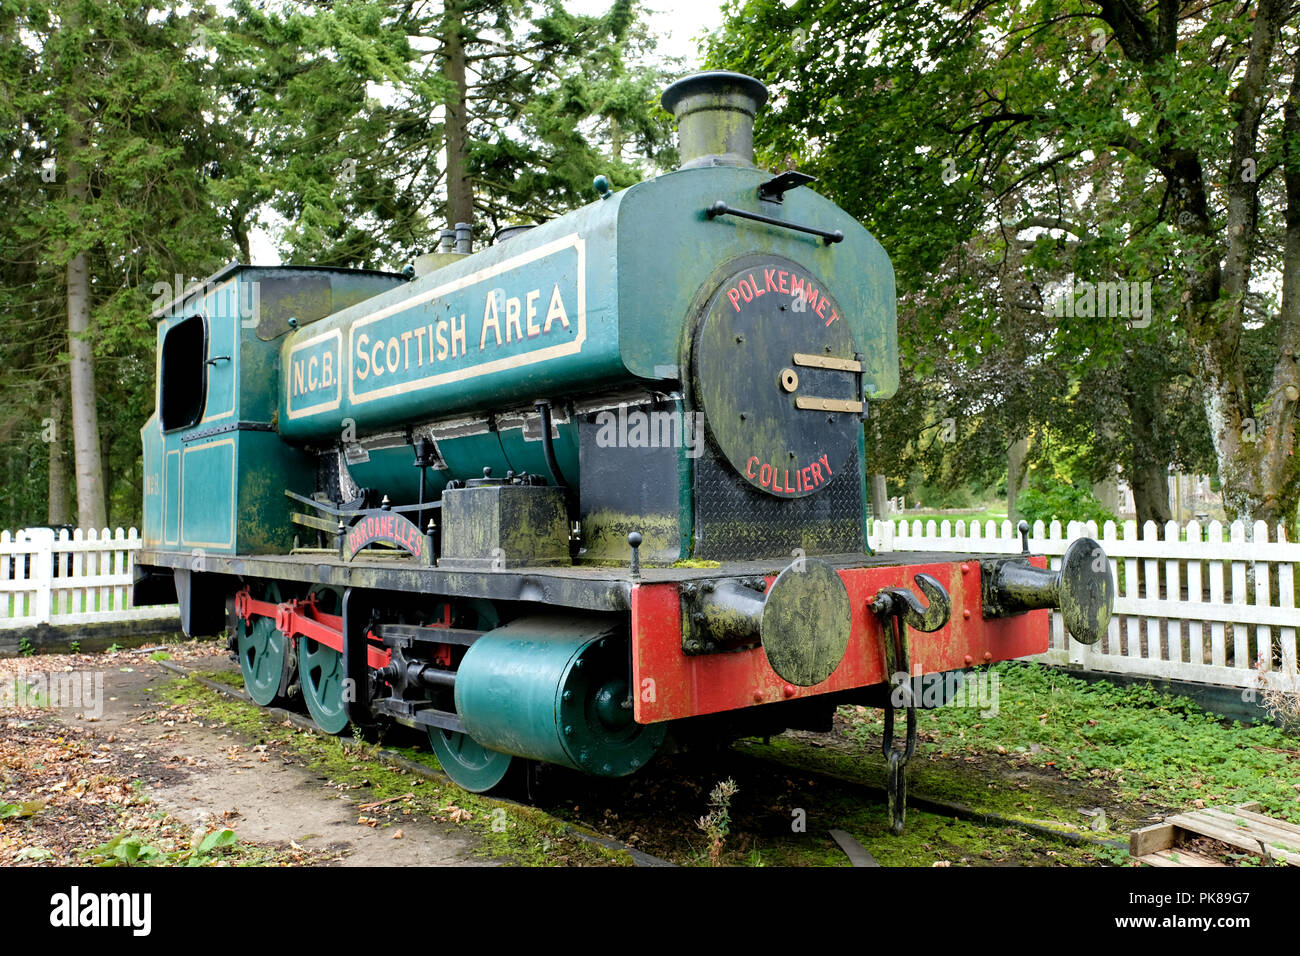 The former NCB locomotive, the 1175 Dardanelles now on display in Polkemmet country park, near Whitburn, West Lothian. Stock Photo